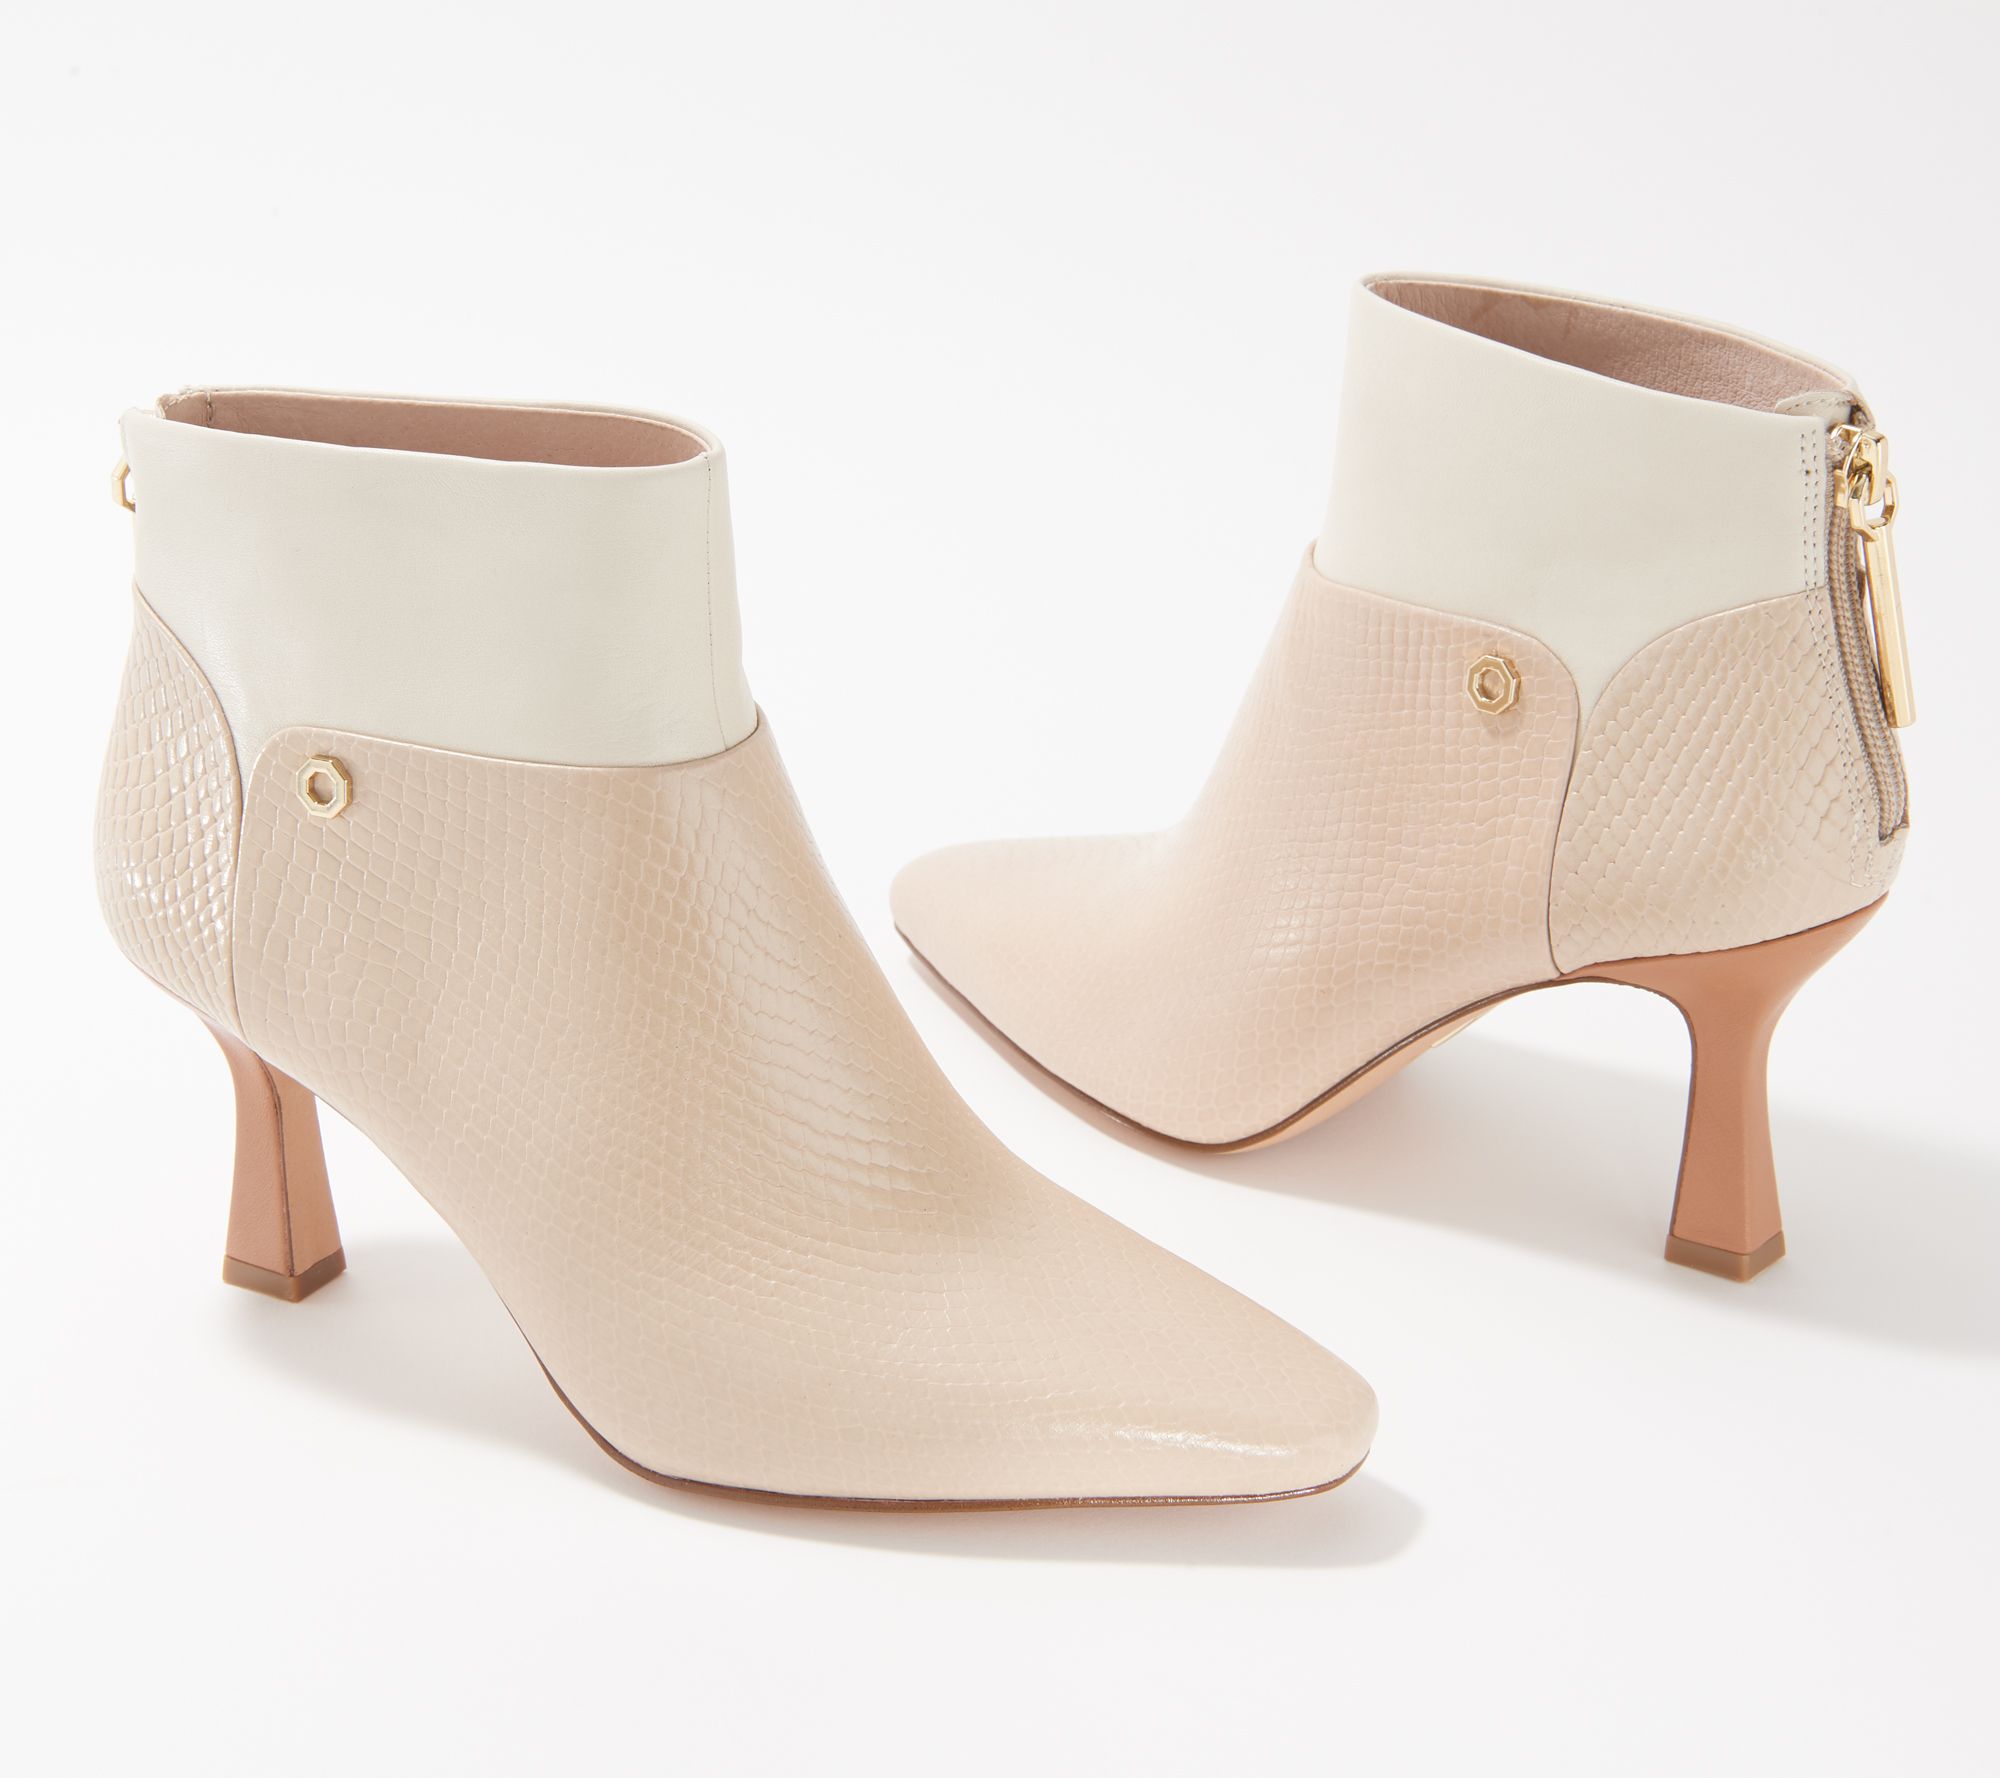 My New Louise et Cie Booties